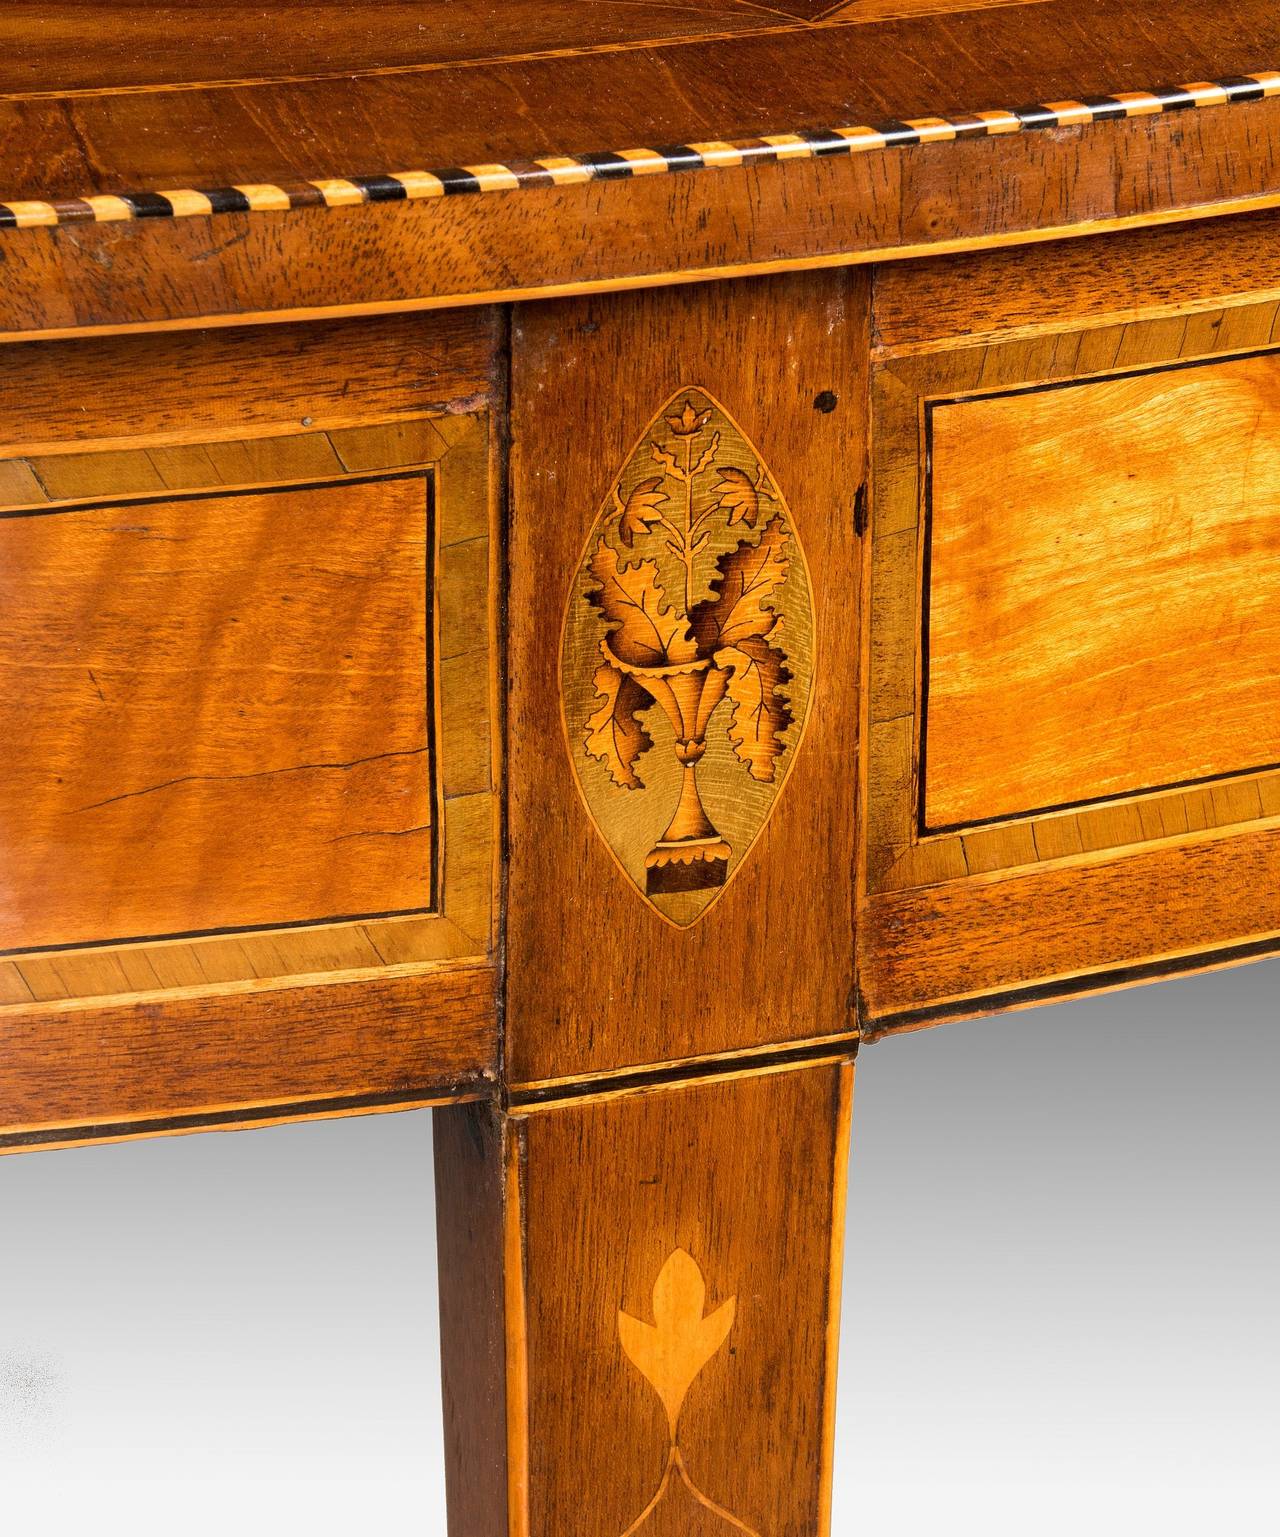 An Irish George III Sheraton period satinwood and sycamore veneered semi elliptical console table in the manner of William Moore of Dublin; the semi elliptical top with a central inlaid fan motif in boxwood on a sycamore ground from which extends